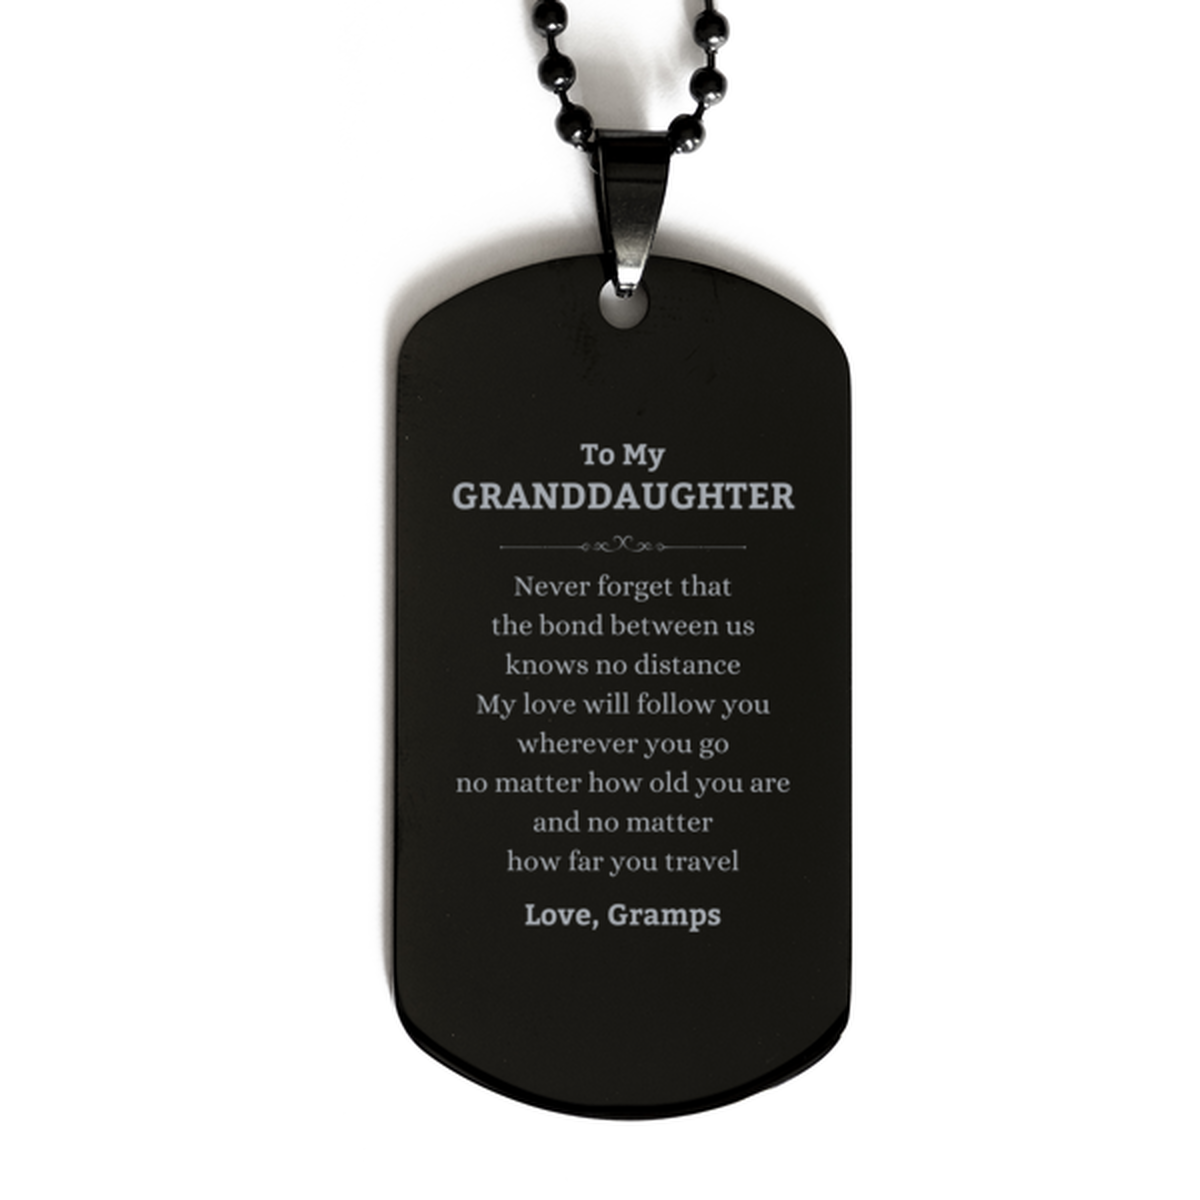 Granddaughter Birthday Gifts from Gramps, Adjustable Black Dog Tag for Granddaughter Christmas Graduation Unique Gifts Granddaughter Never forget that the bond between us knows no distance. Love, Gramps